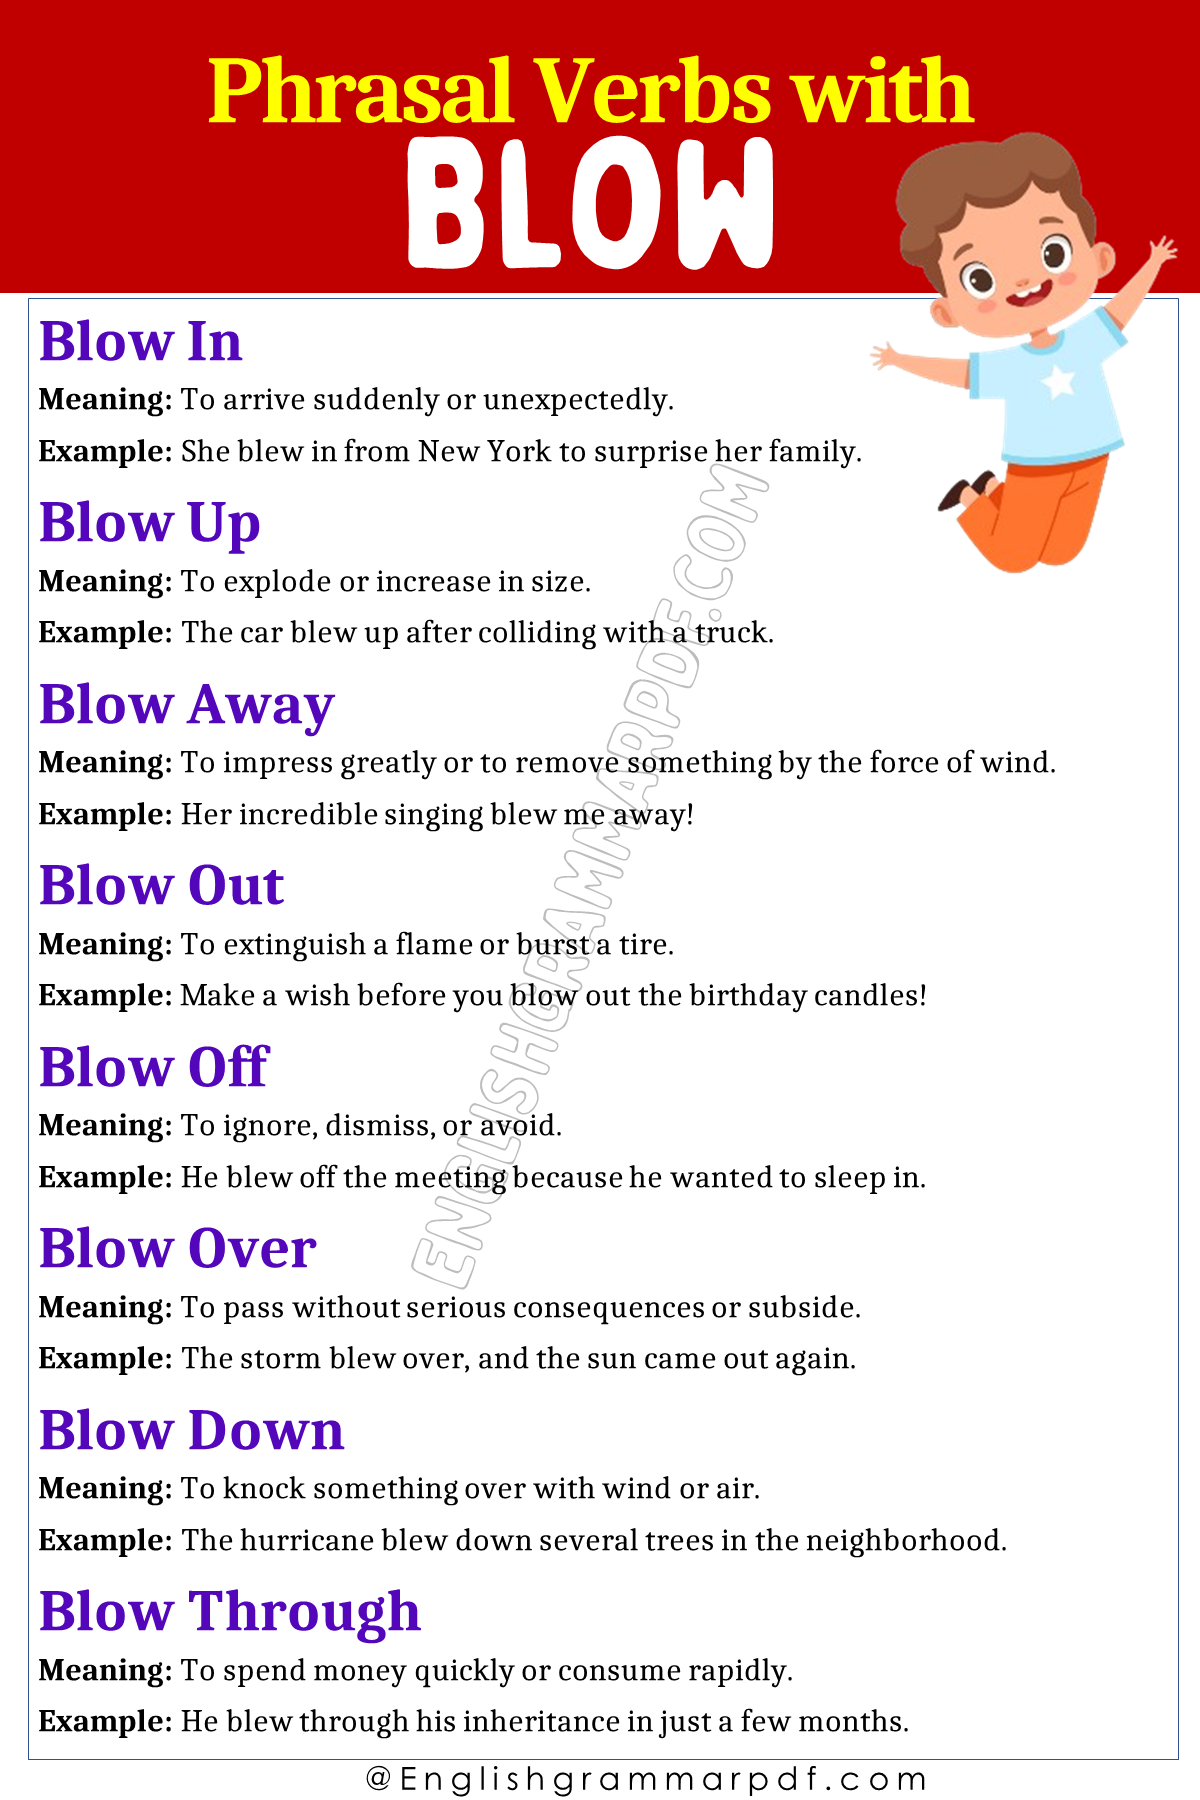 Phrasal Verbs with Blow